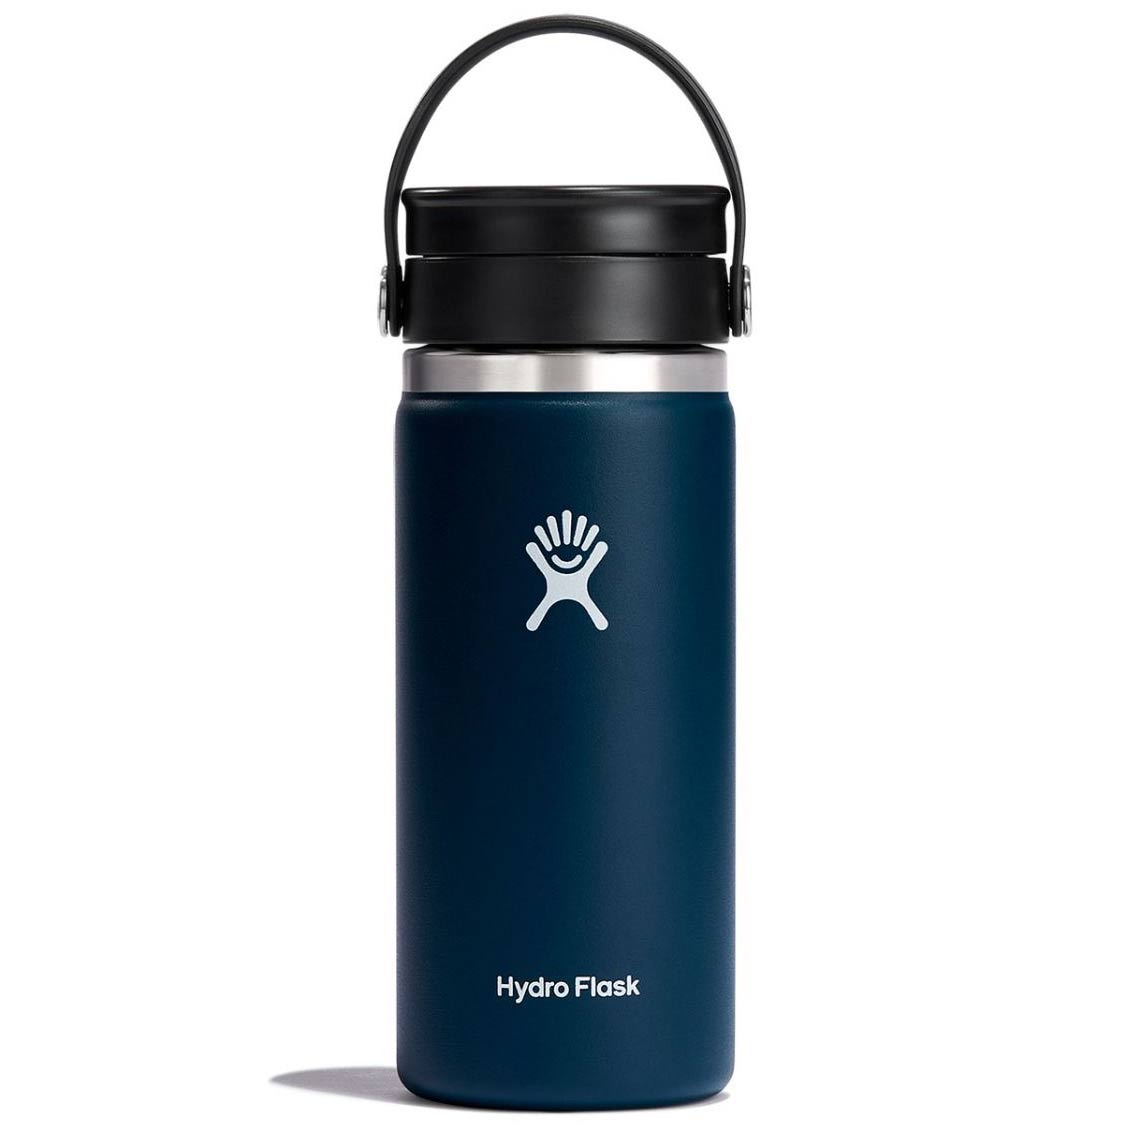 Picture of Hydro Flask 16 oz Wide Mouth Coffee Flask + Flex Sip Lid - 473 ml - Indigo